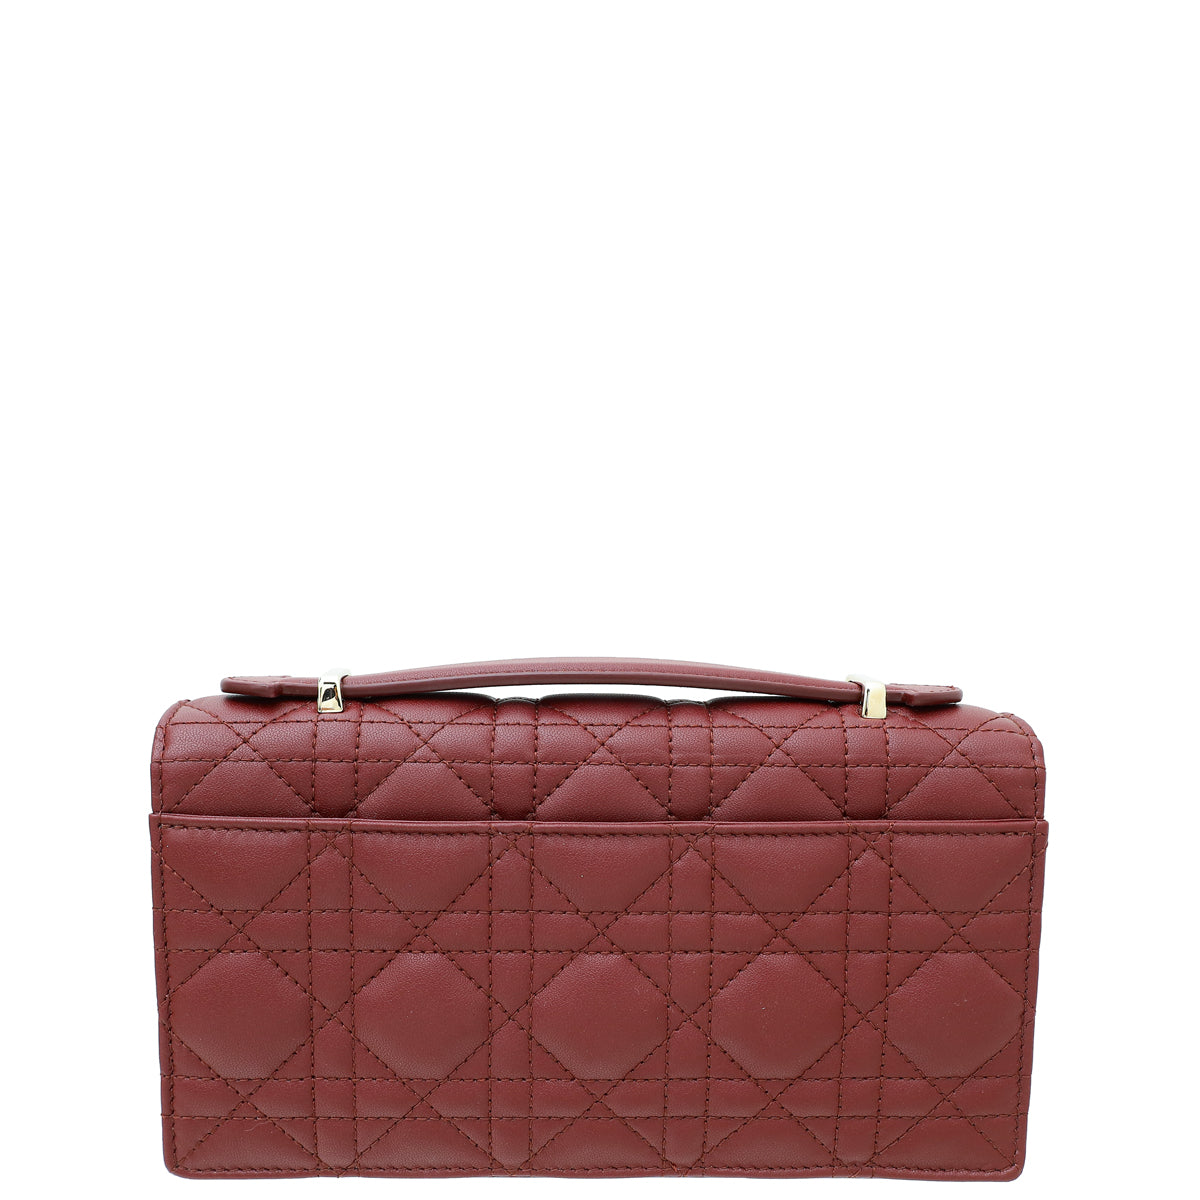 Christian Dior Burgundy My Dior Quilted Mini Bag